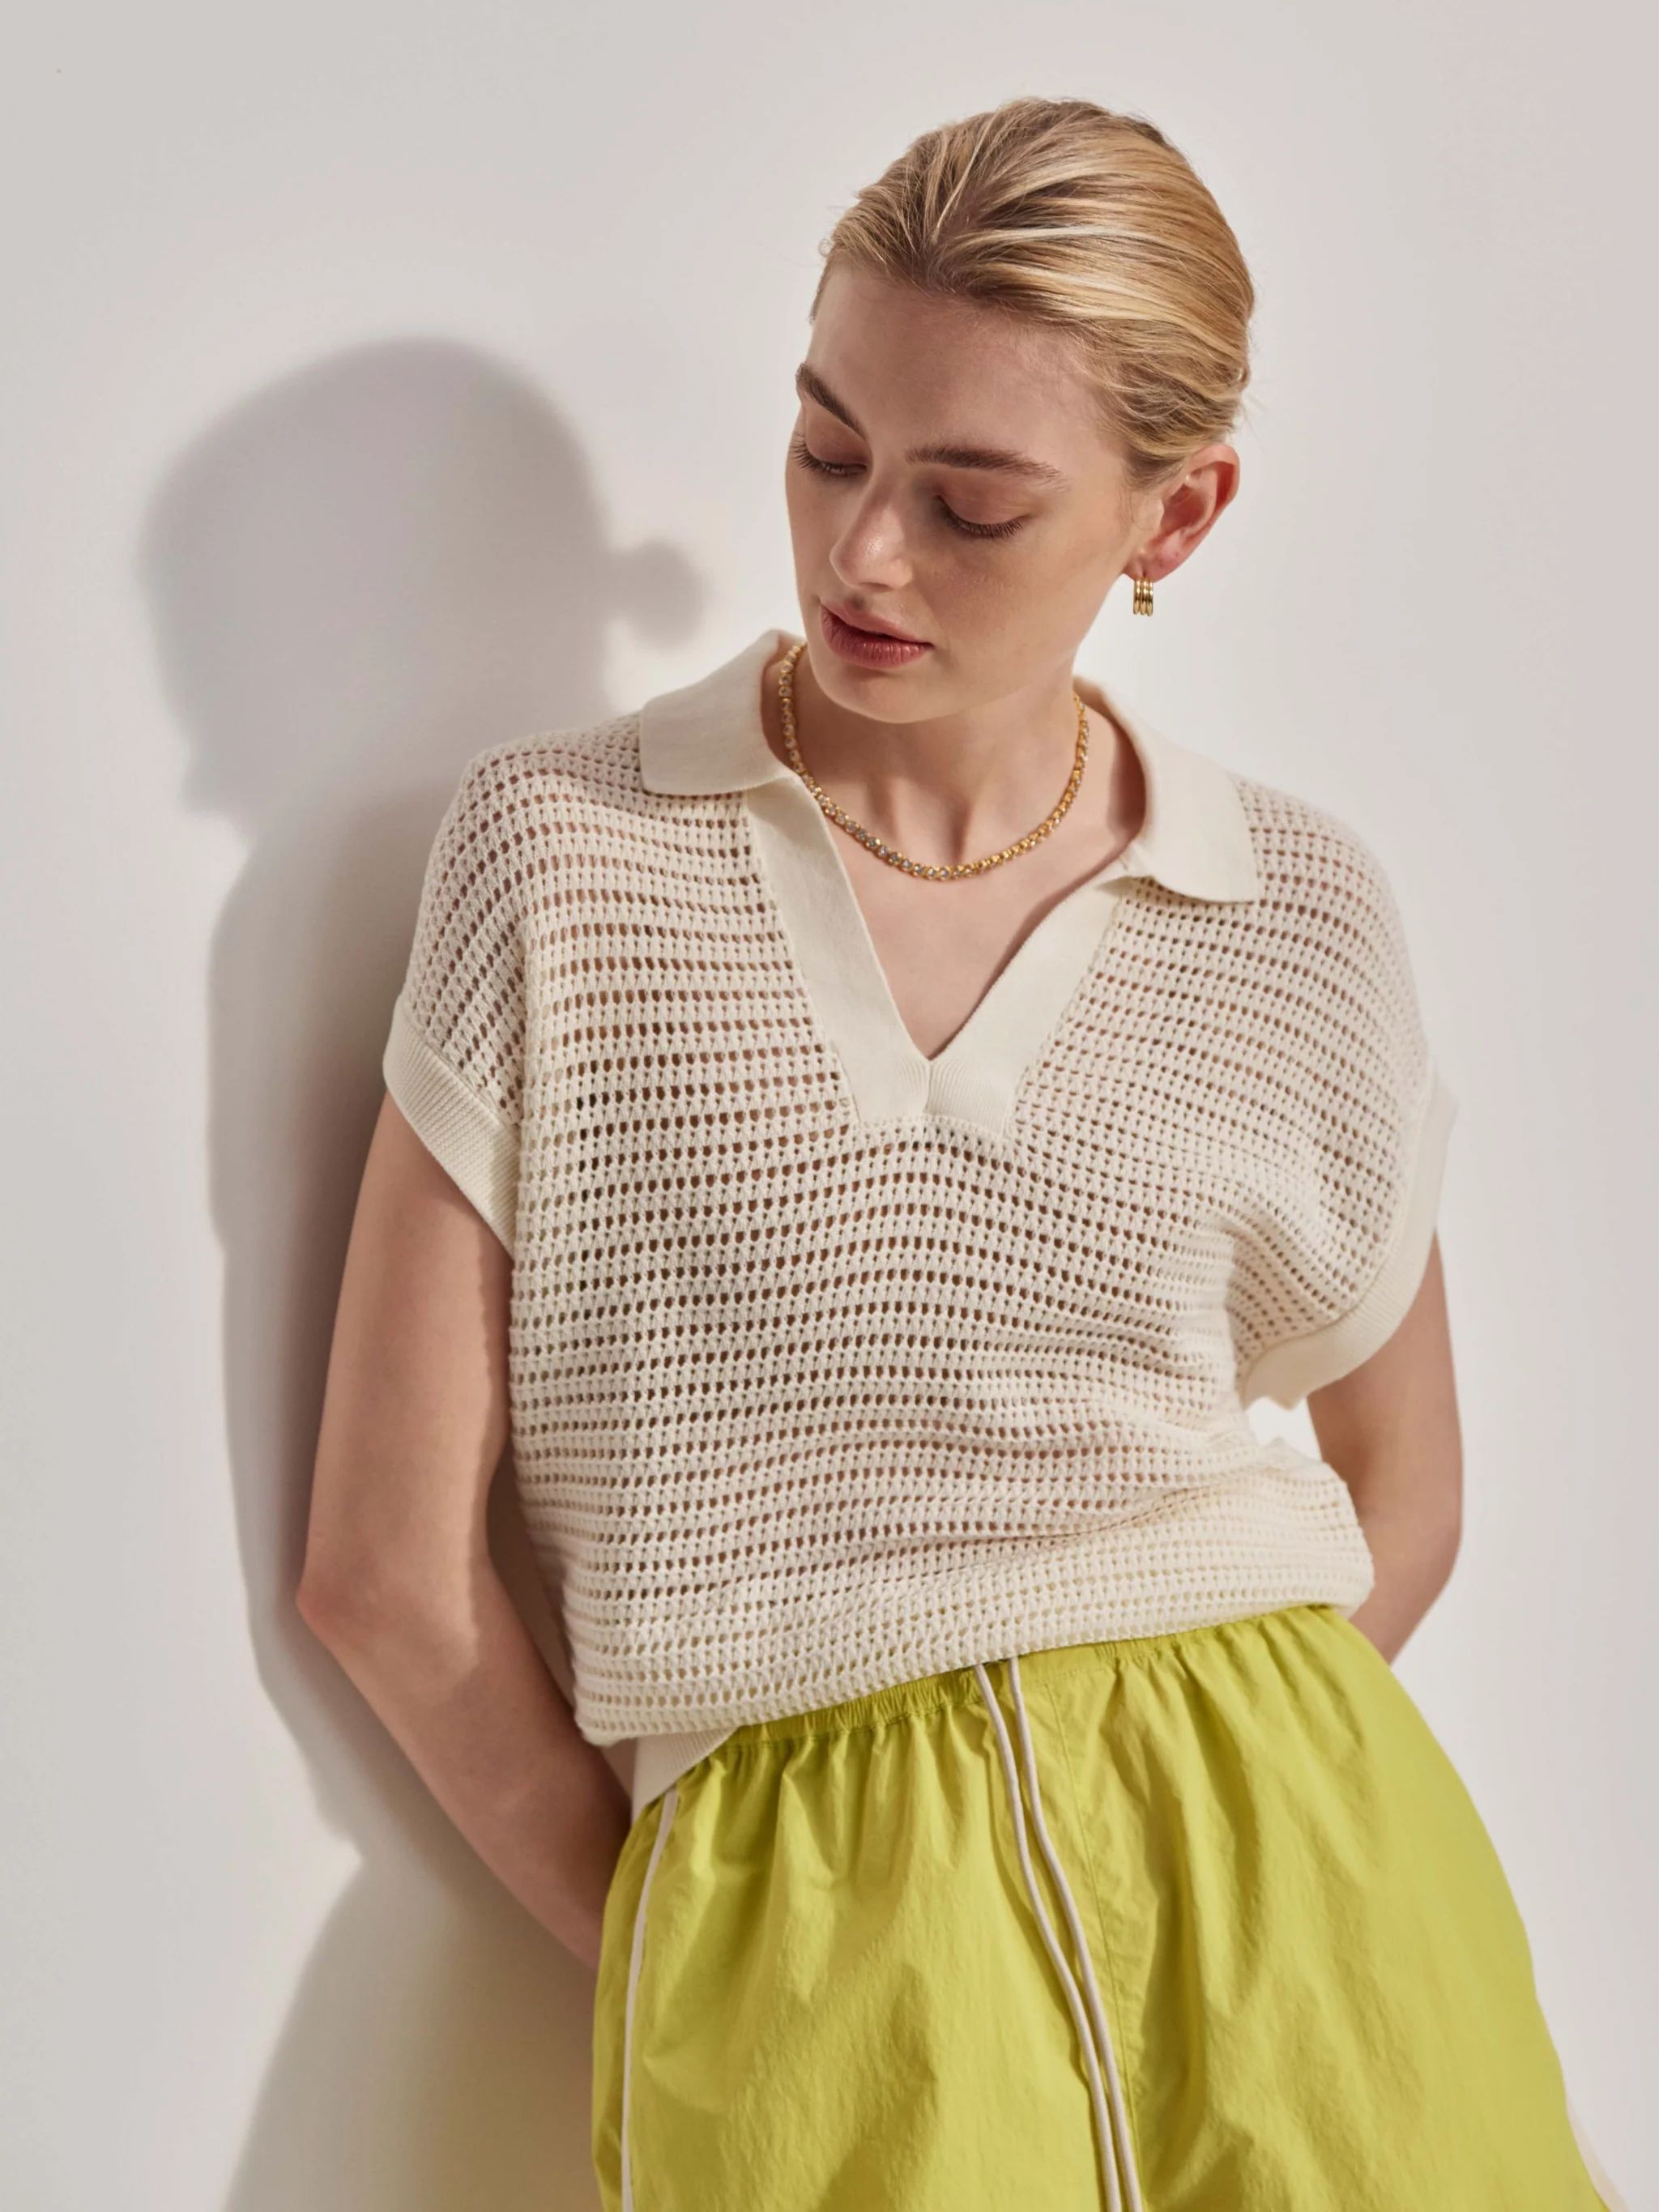 Varley Otto Crochet Ivory Pullover | Four and Twenty Sailors